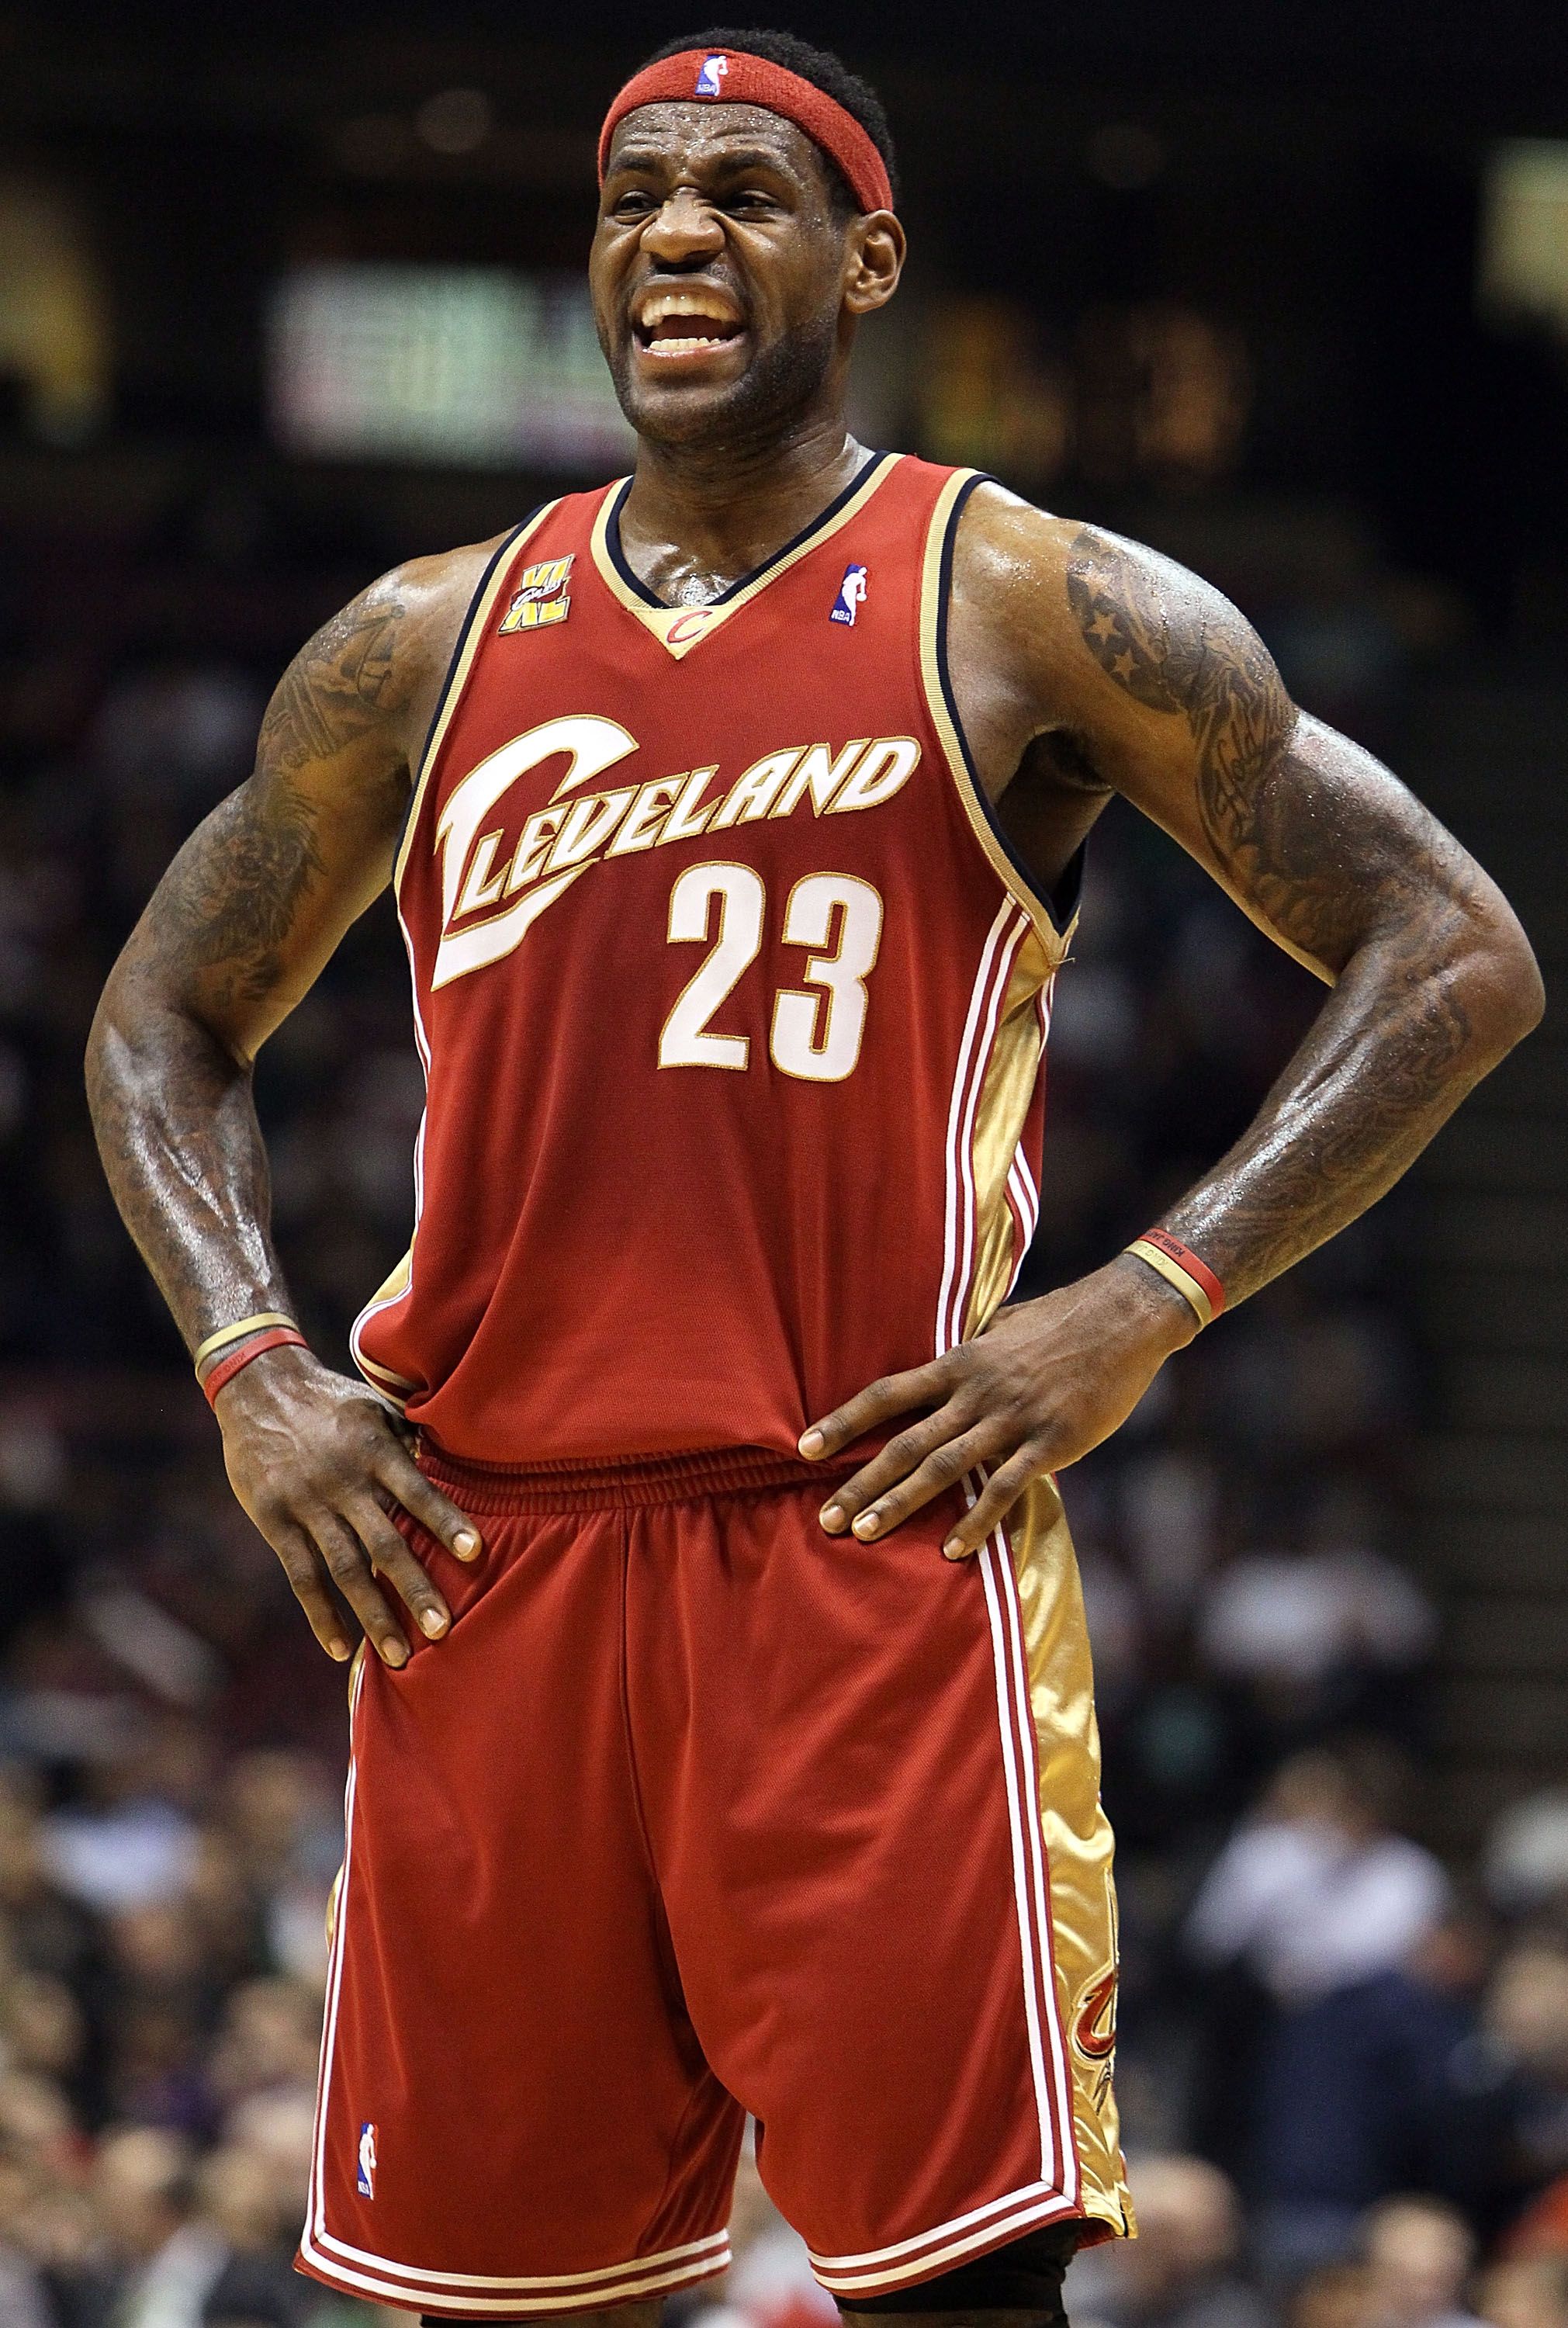 EAST RUTHERFORD, NJ - MARCH 03:  LeBron James #23 of the Cleveland Cavaliers shouts to his teammates against the New Jersey Nets at the Izod Center on March 3, 2010 in East Rutherford, New Jersey.NOTE TO USER: User expressly acknowledges and agrees that, 